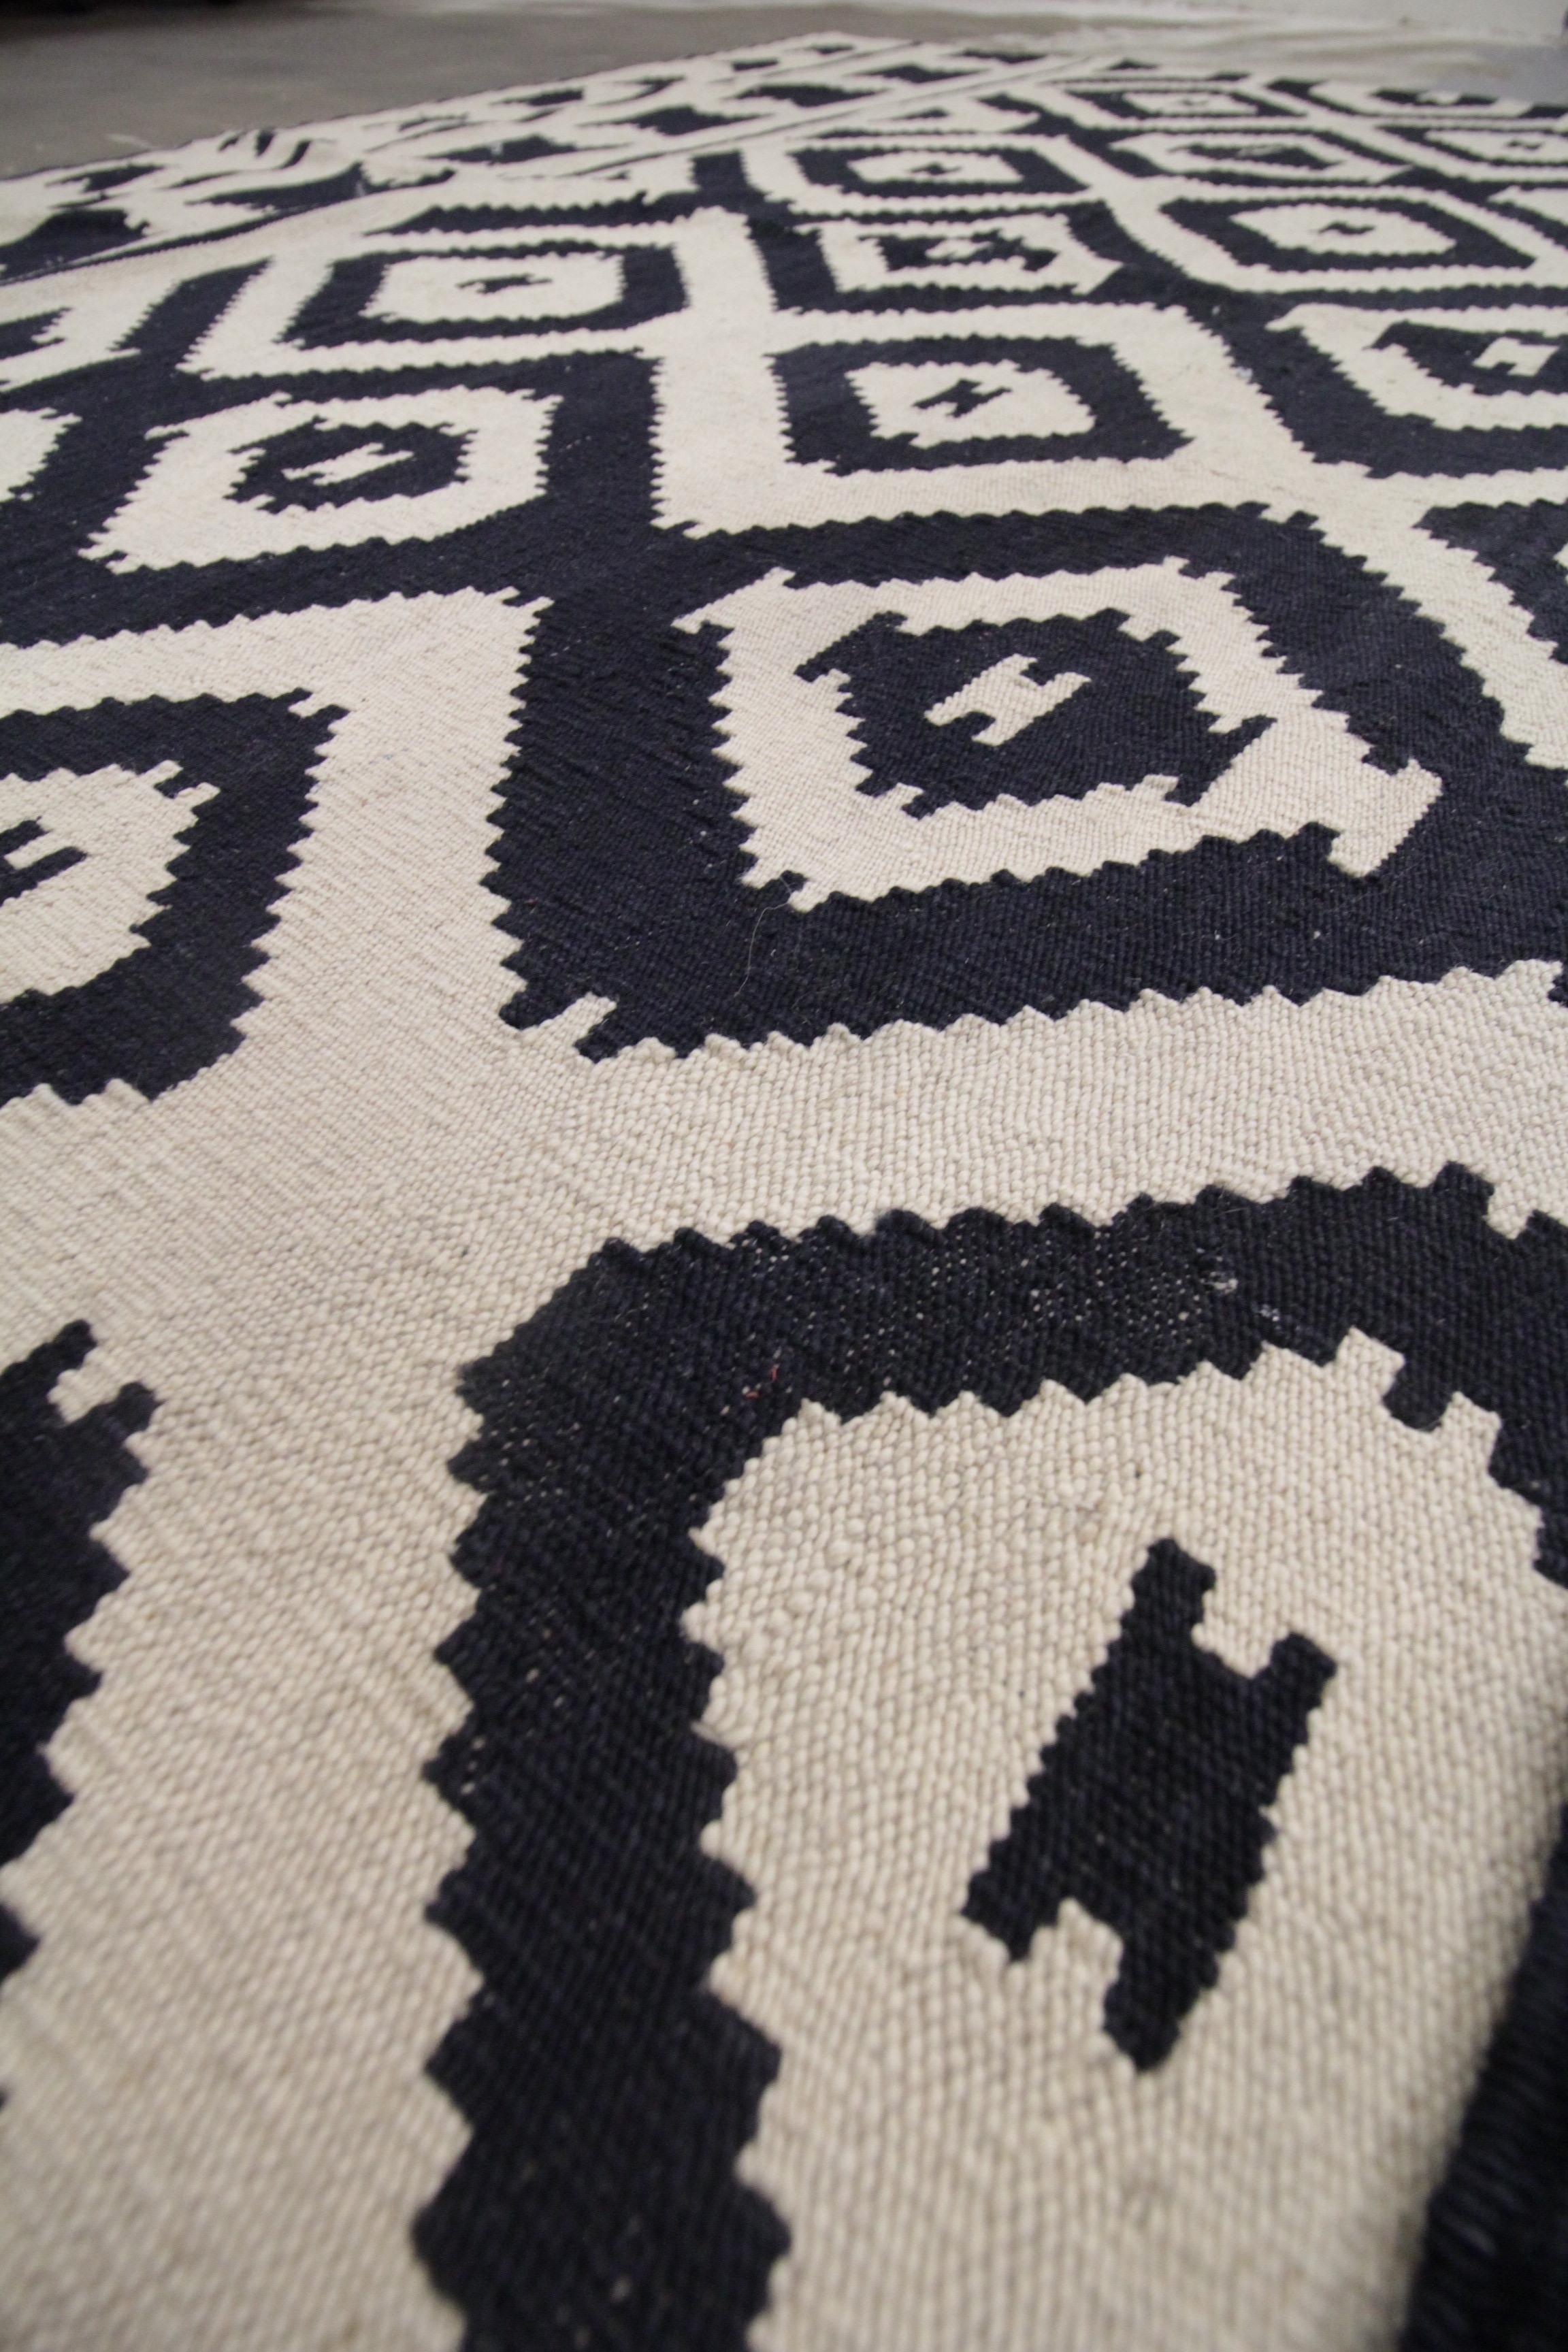 Aztec Flat Kilim Rug Modern Geometric Kilims Handmade Carpet In Excellent Condition For Sale In Hampshire, GB